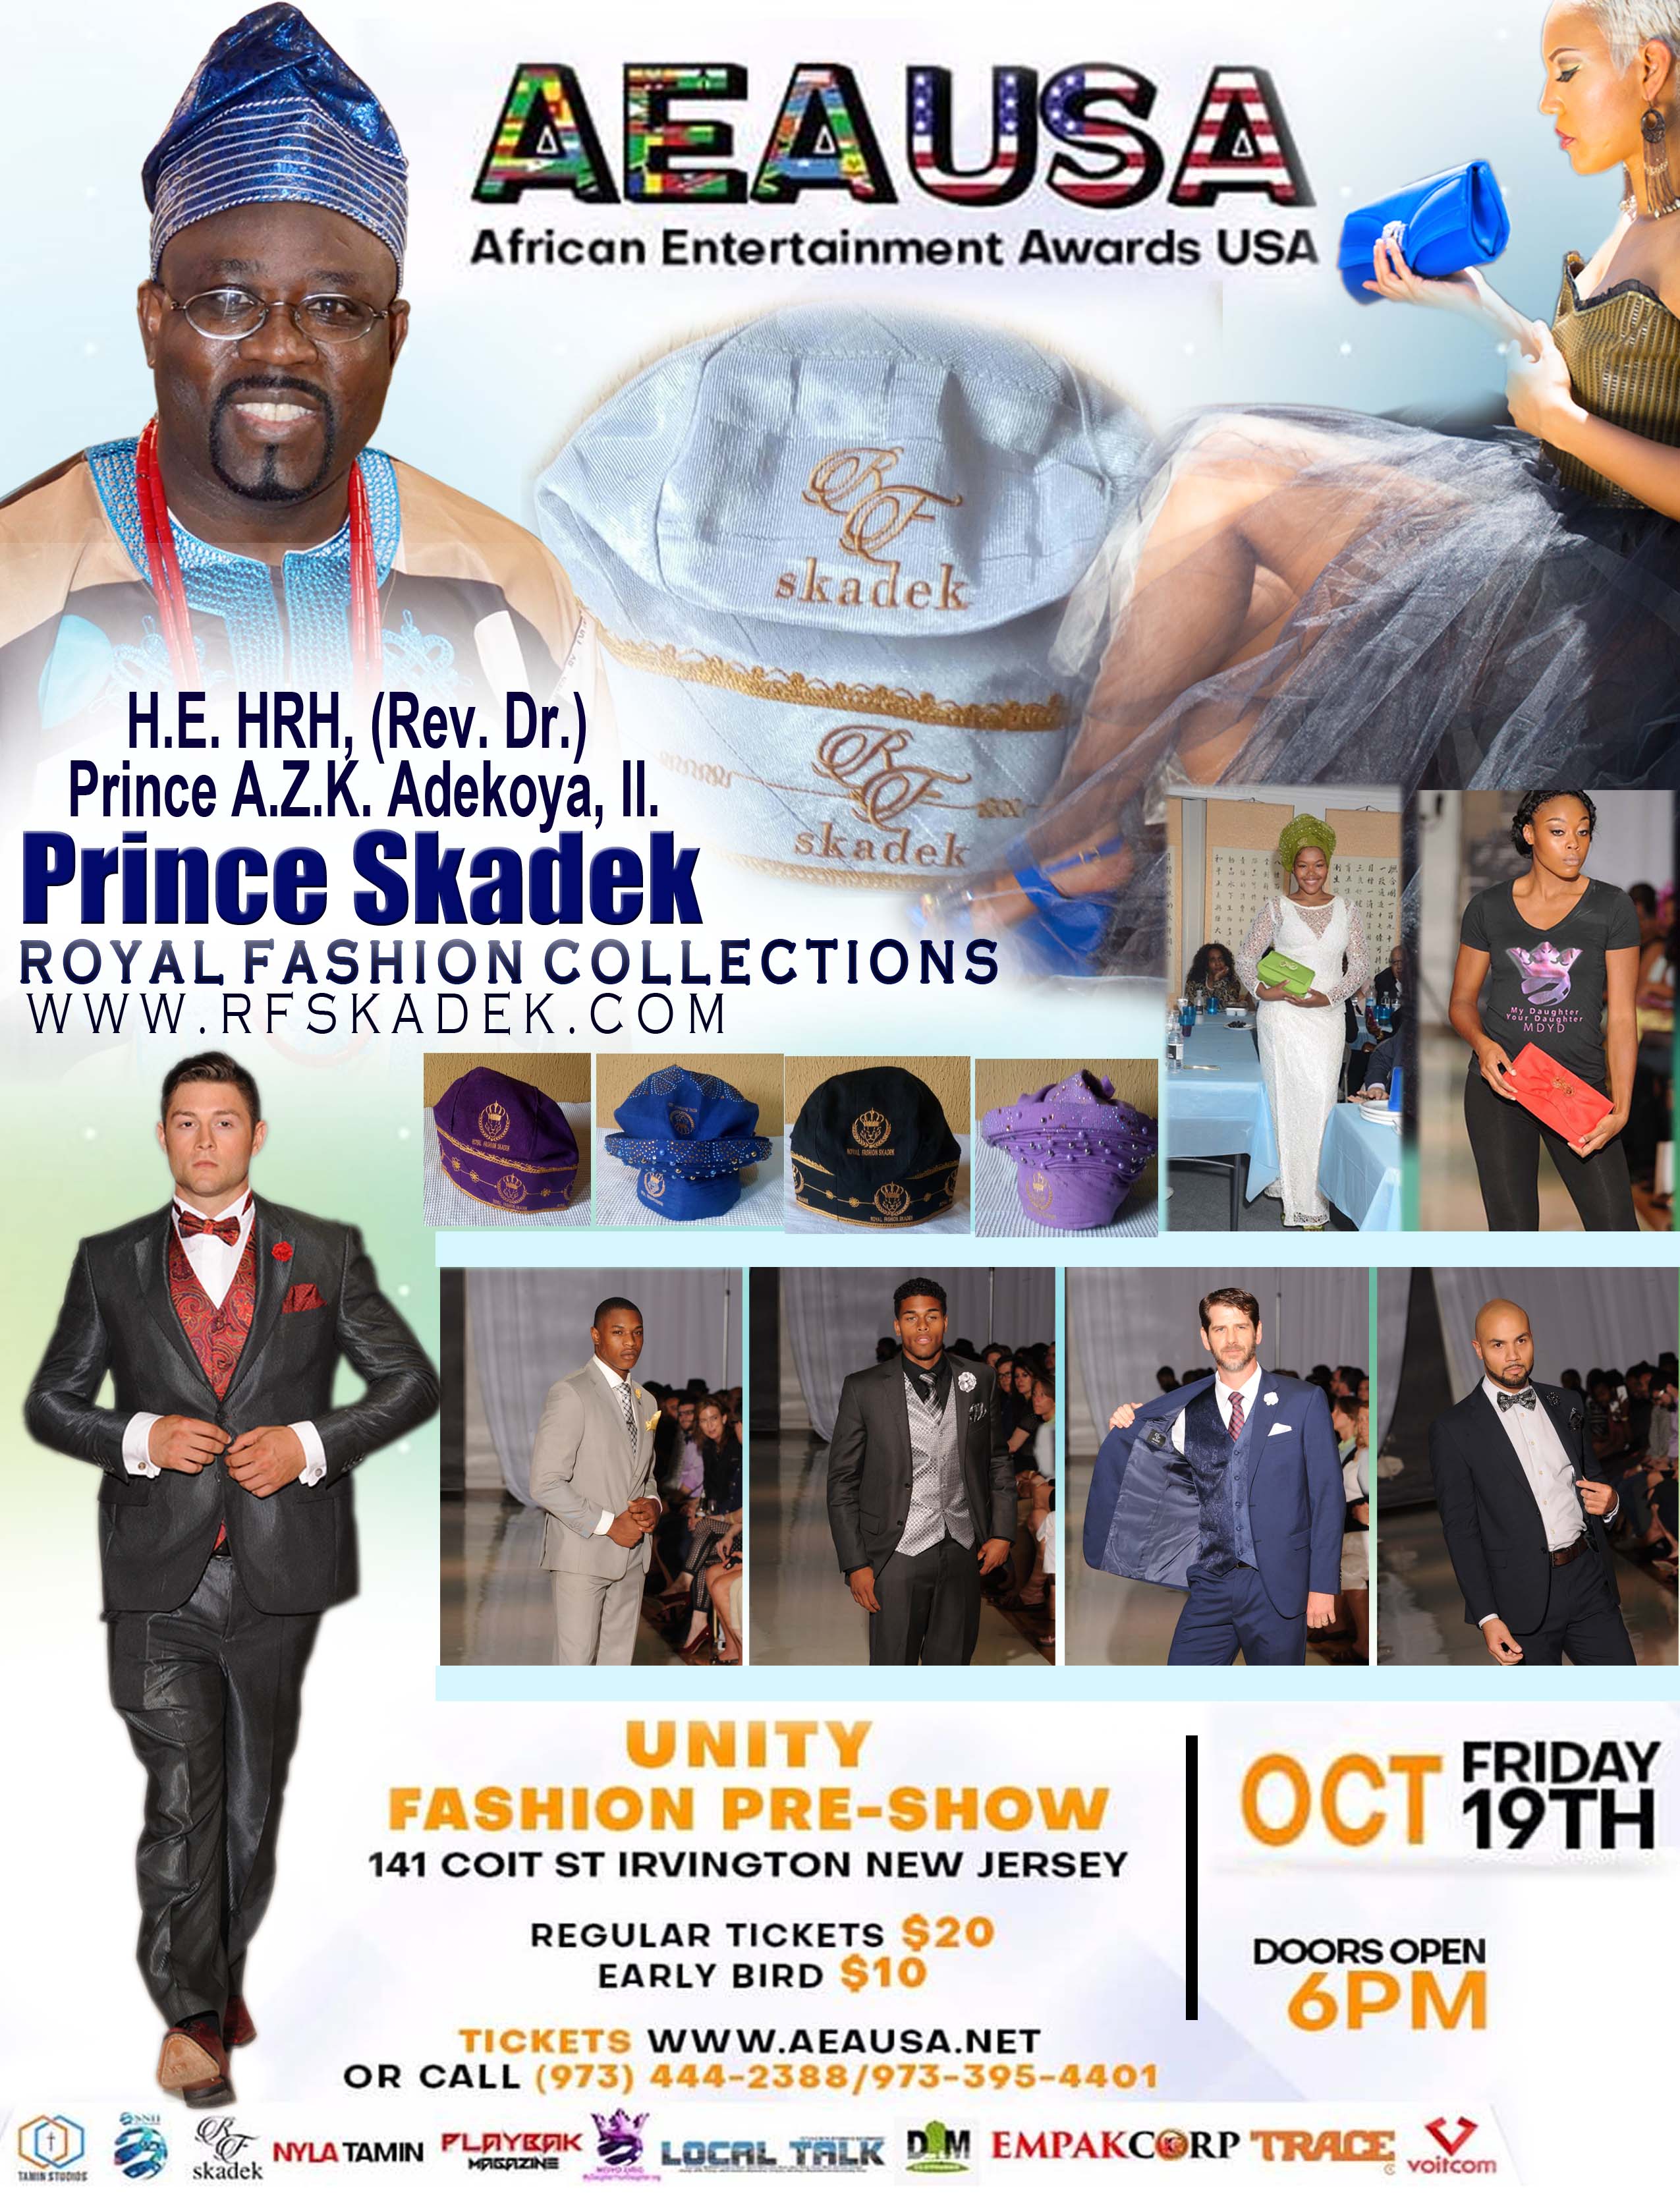 FASHION SKADEK RoyalFashion Skadek (www.rfskadek.com) PROMISED TO FEATURE AND RIP & STUMP THE RUNWAY WITH HIS CUSTOM ELITE CORPORATE WESTERN SUIT AND THE AFRICAN ROYAL TRADITIONAL STEP-OUT OUTFIT FROM HEAD TO TOE ON THE RUNWAY IN SUPPORT OF THE UNITY FASHION PRE-SHOW 